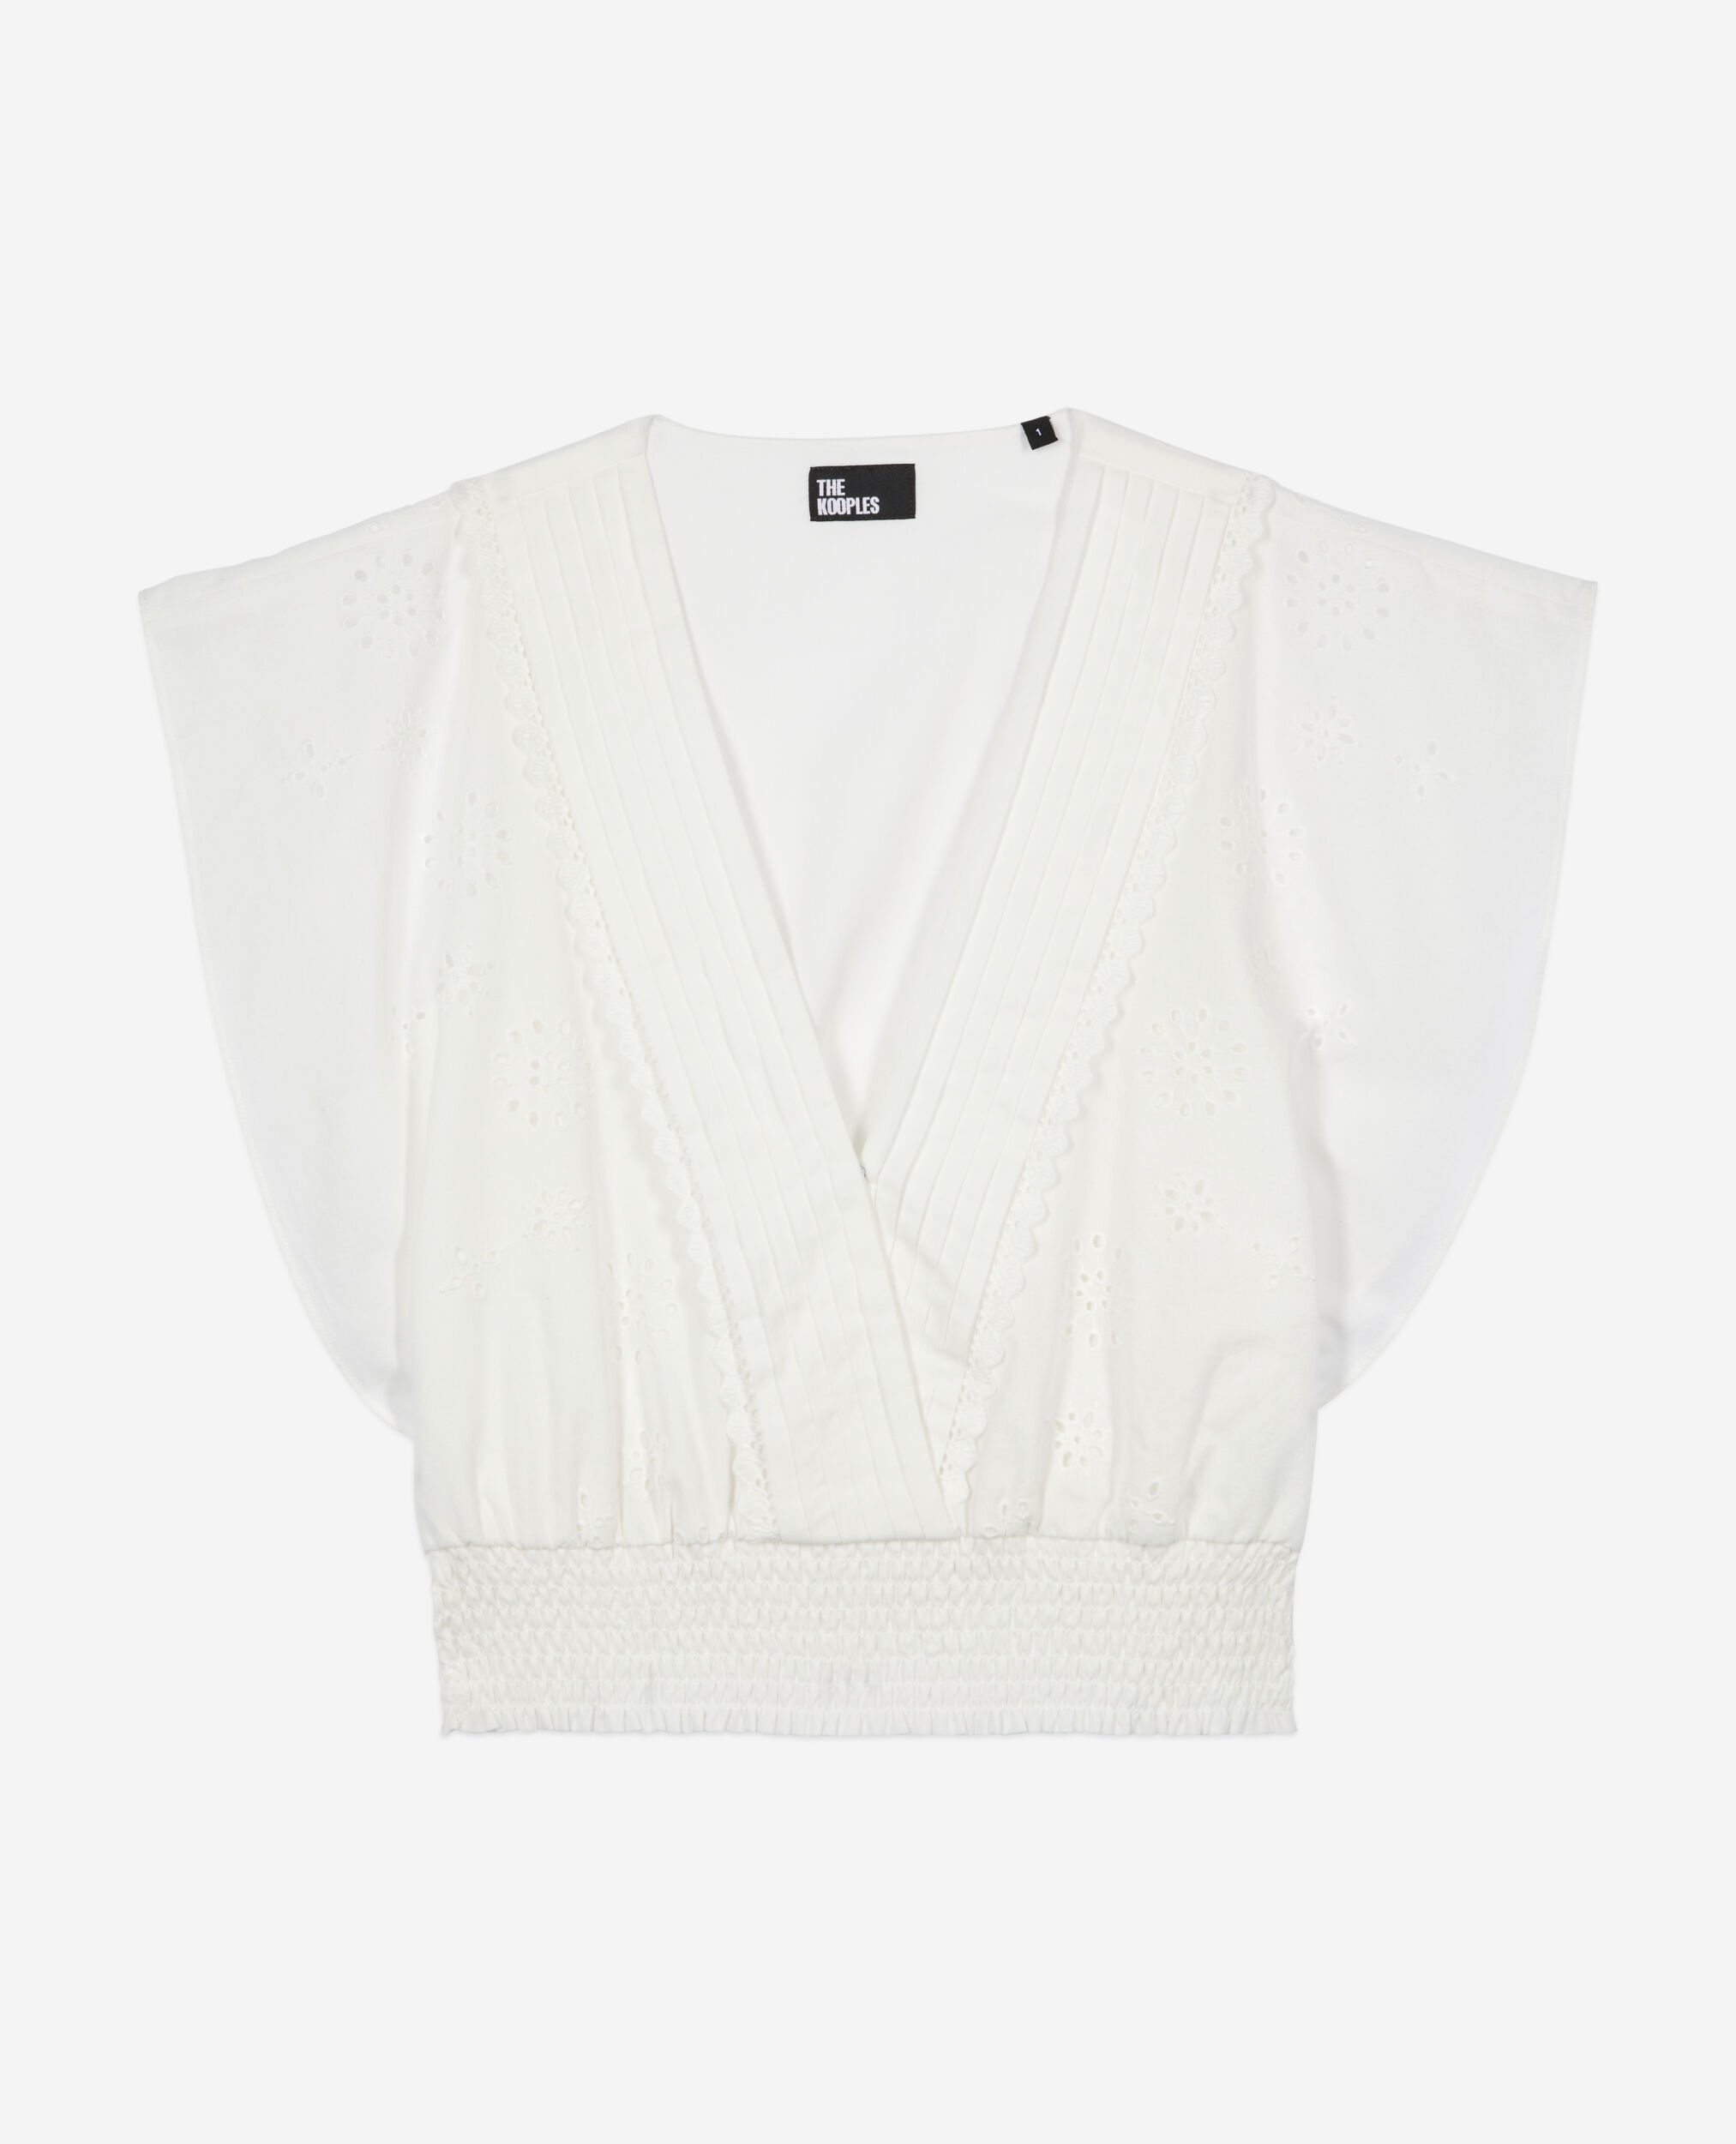 Top court blanc en broderie anglaise, WHITE, hi-res image number null